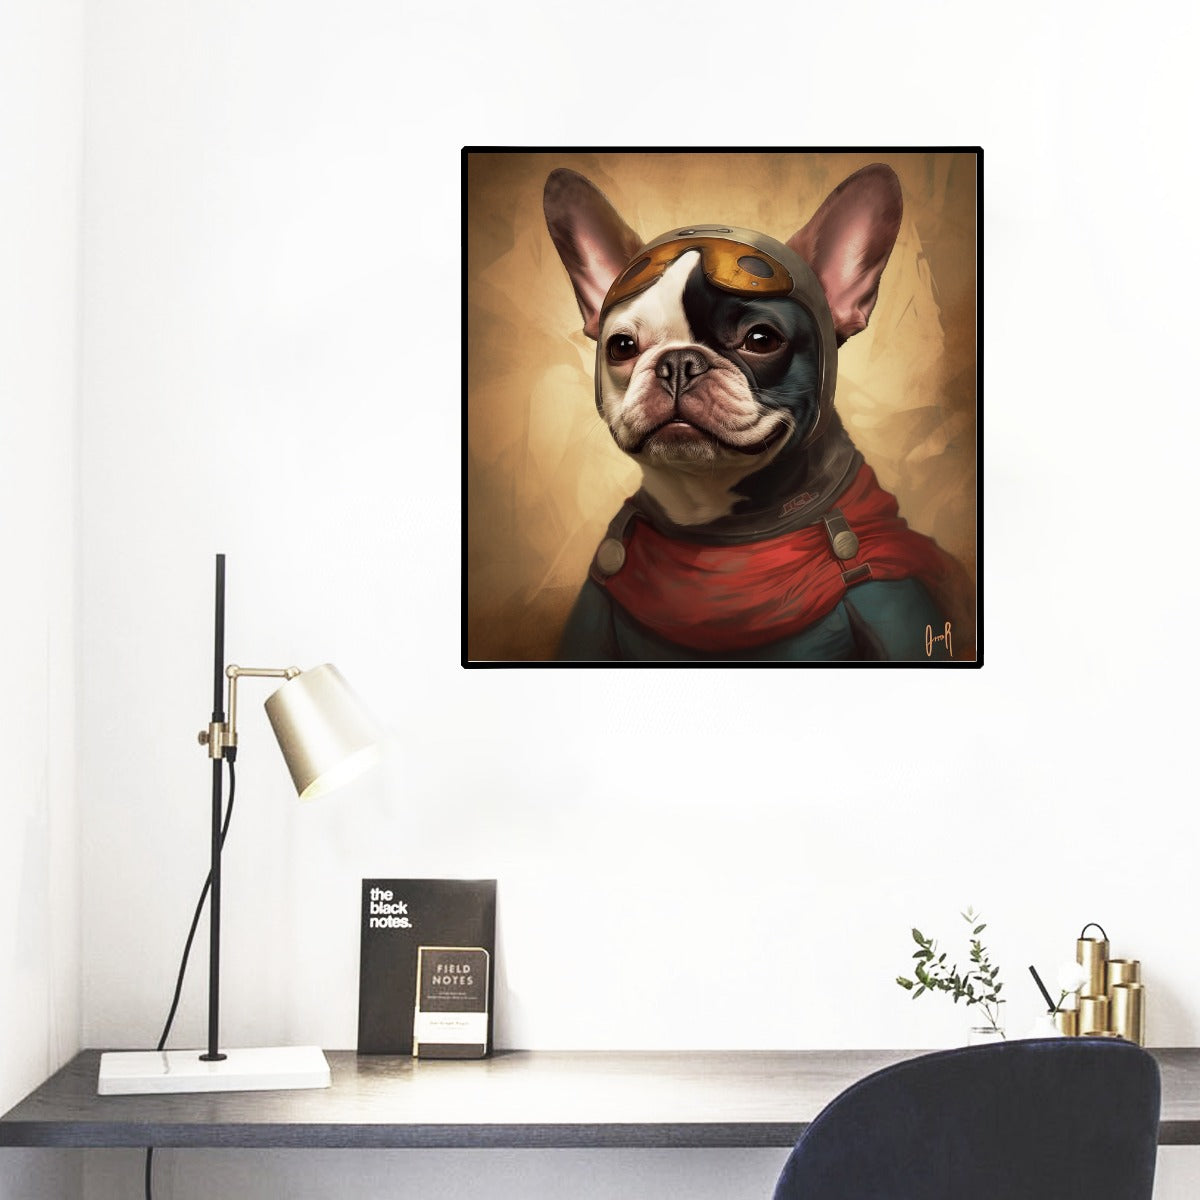 Enchanting Frenchie-Themed Wall Mural